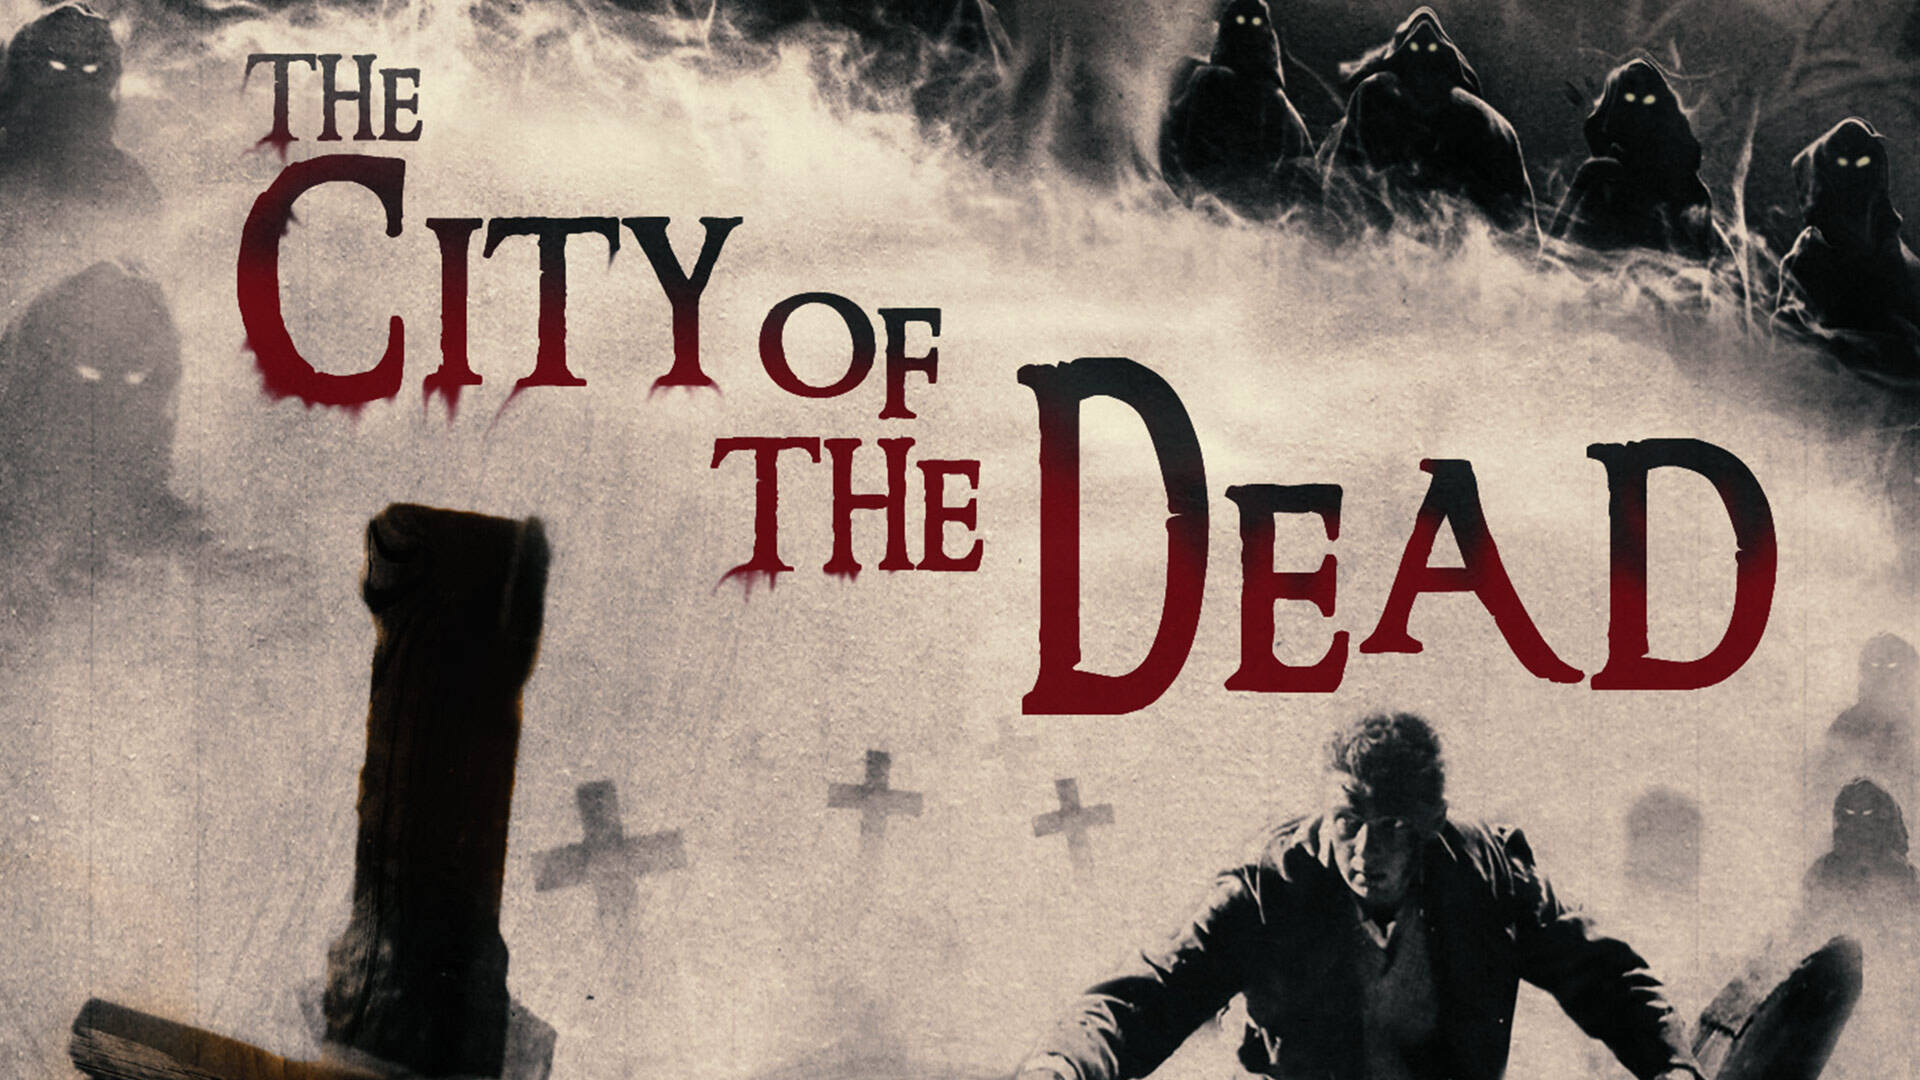 44-facts-about-the-movie-the-city-of-the-dead